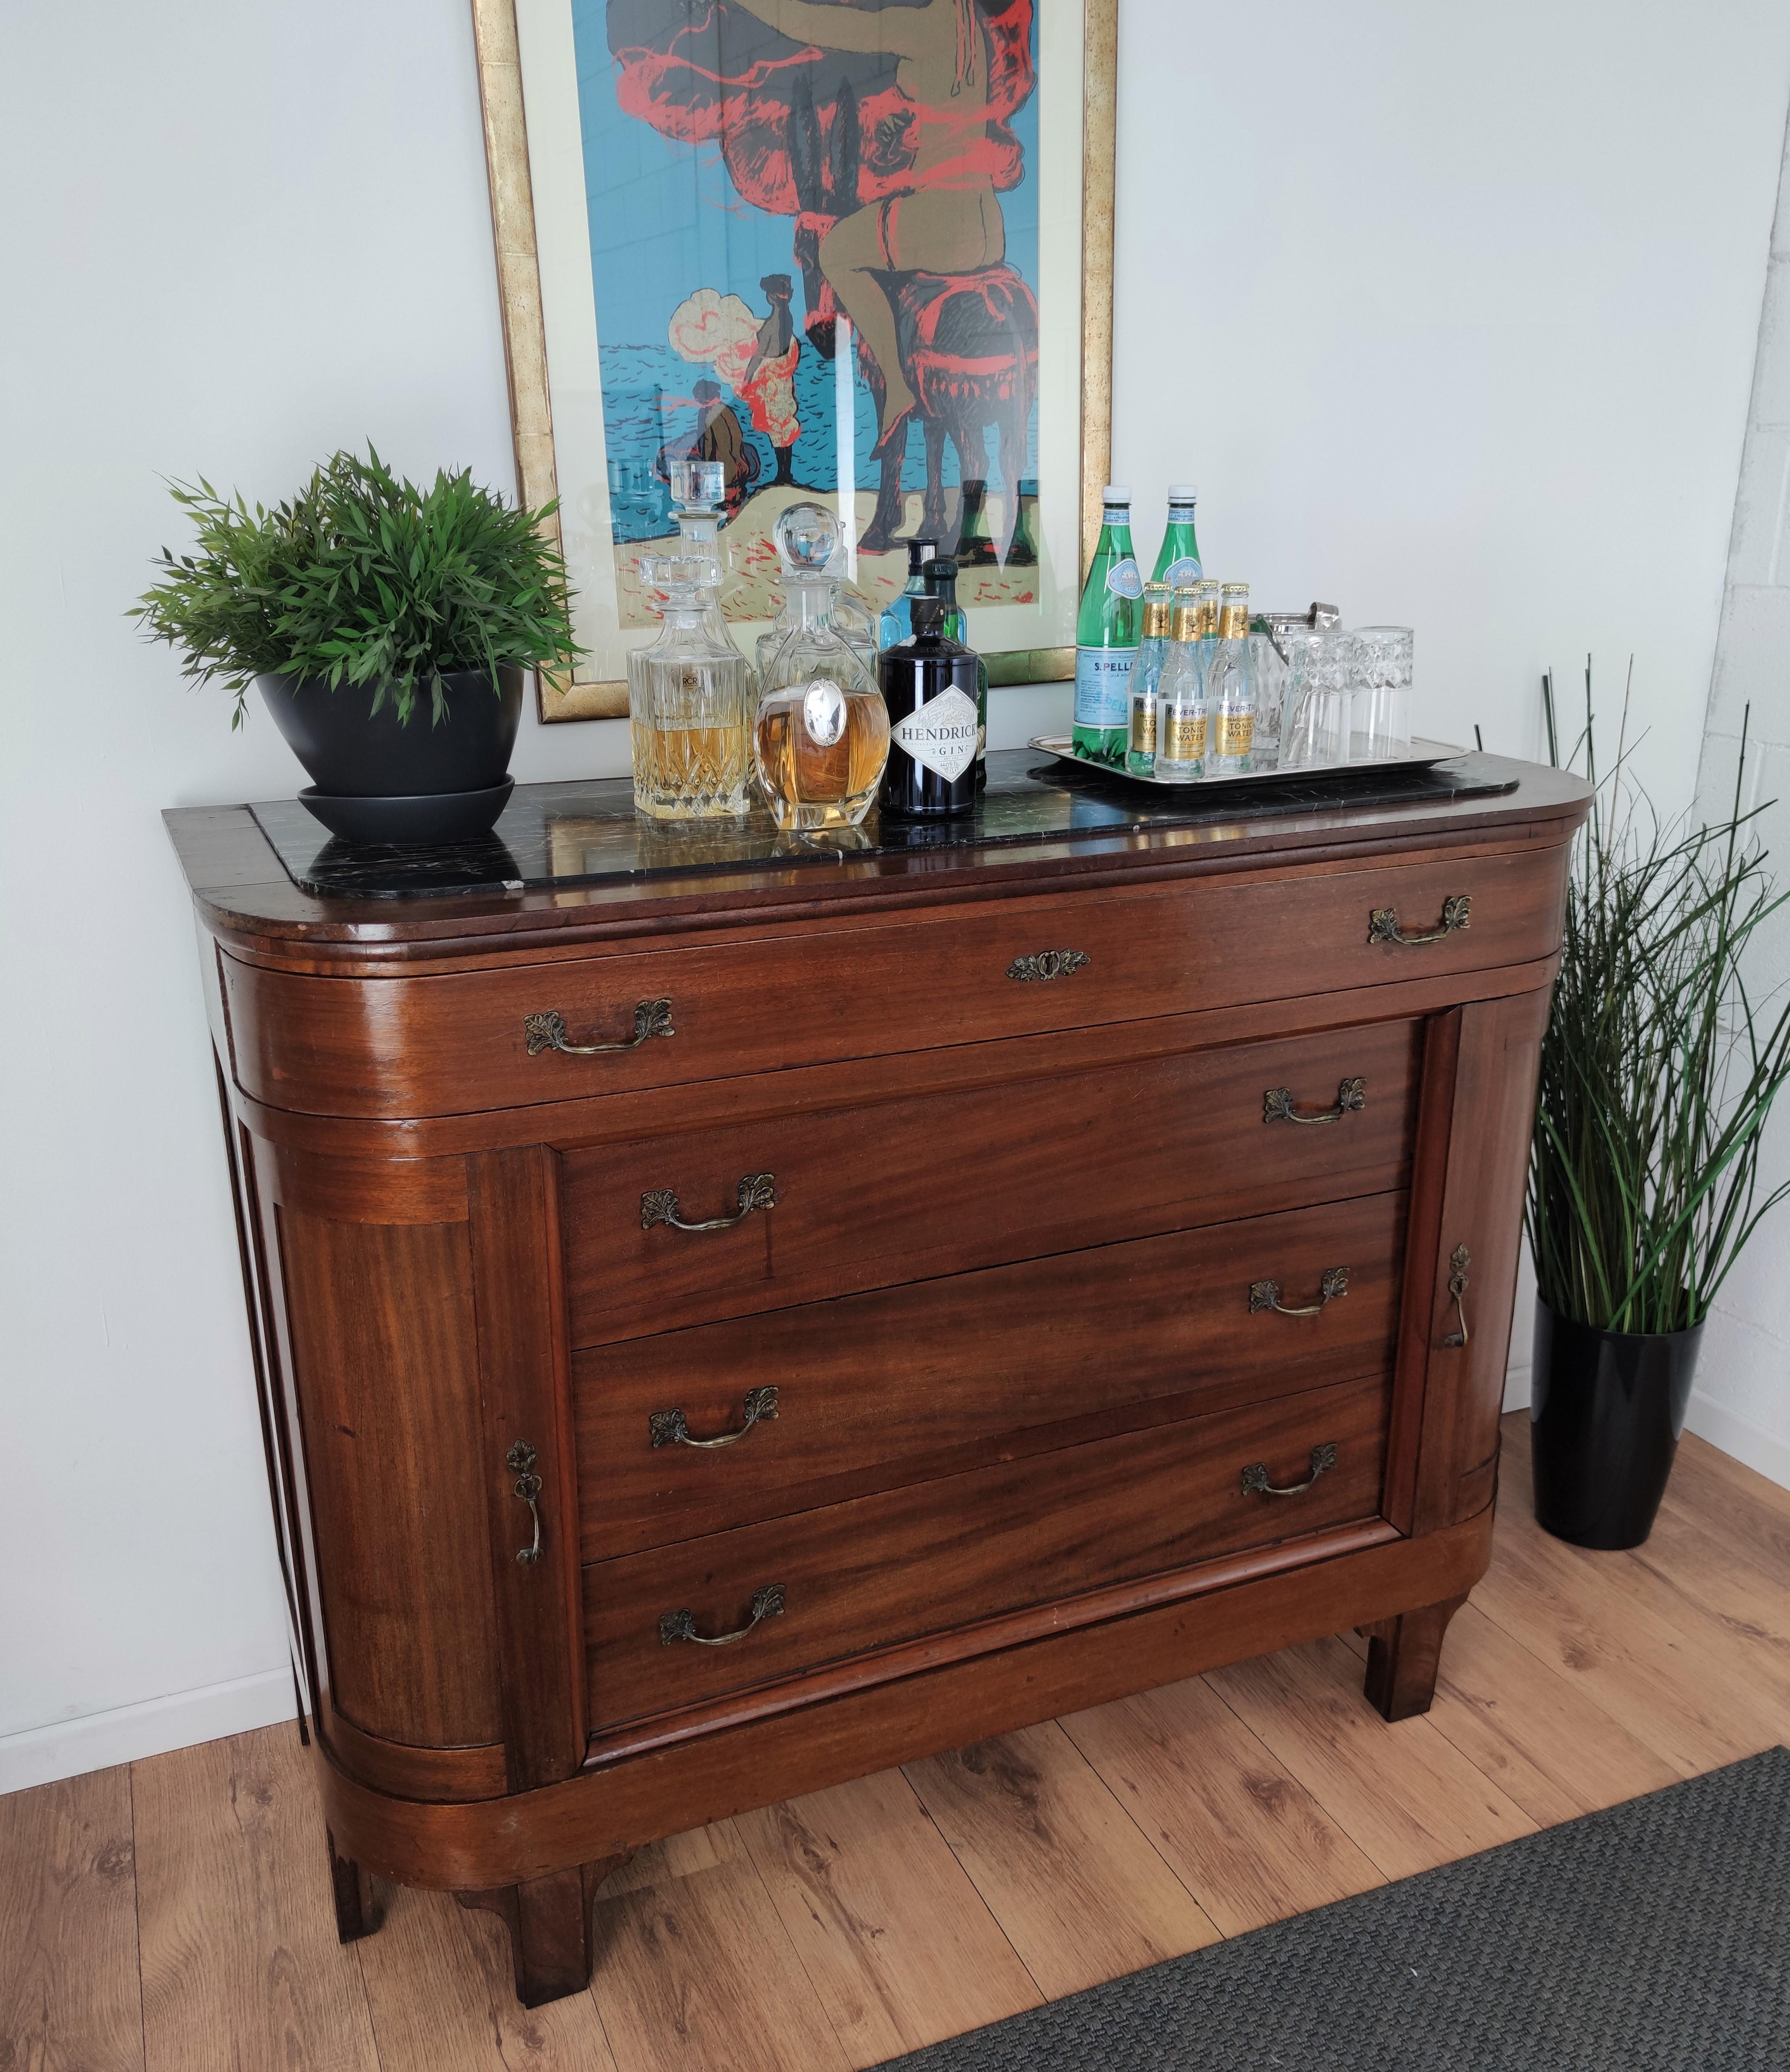 Very elegant Italian Art Deco Mid-Century Modern chest of drawers, commode cabinet, in beautiful veneer walnut wood, two side doors, 4 drawers and decorated handles with black Portoro marble top. Portoro is a high-quality black marble, where the